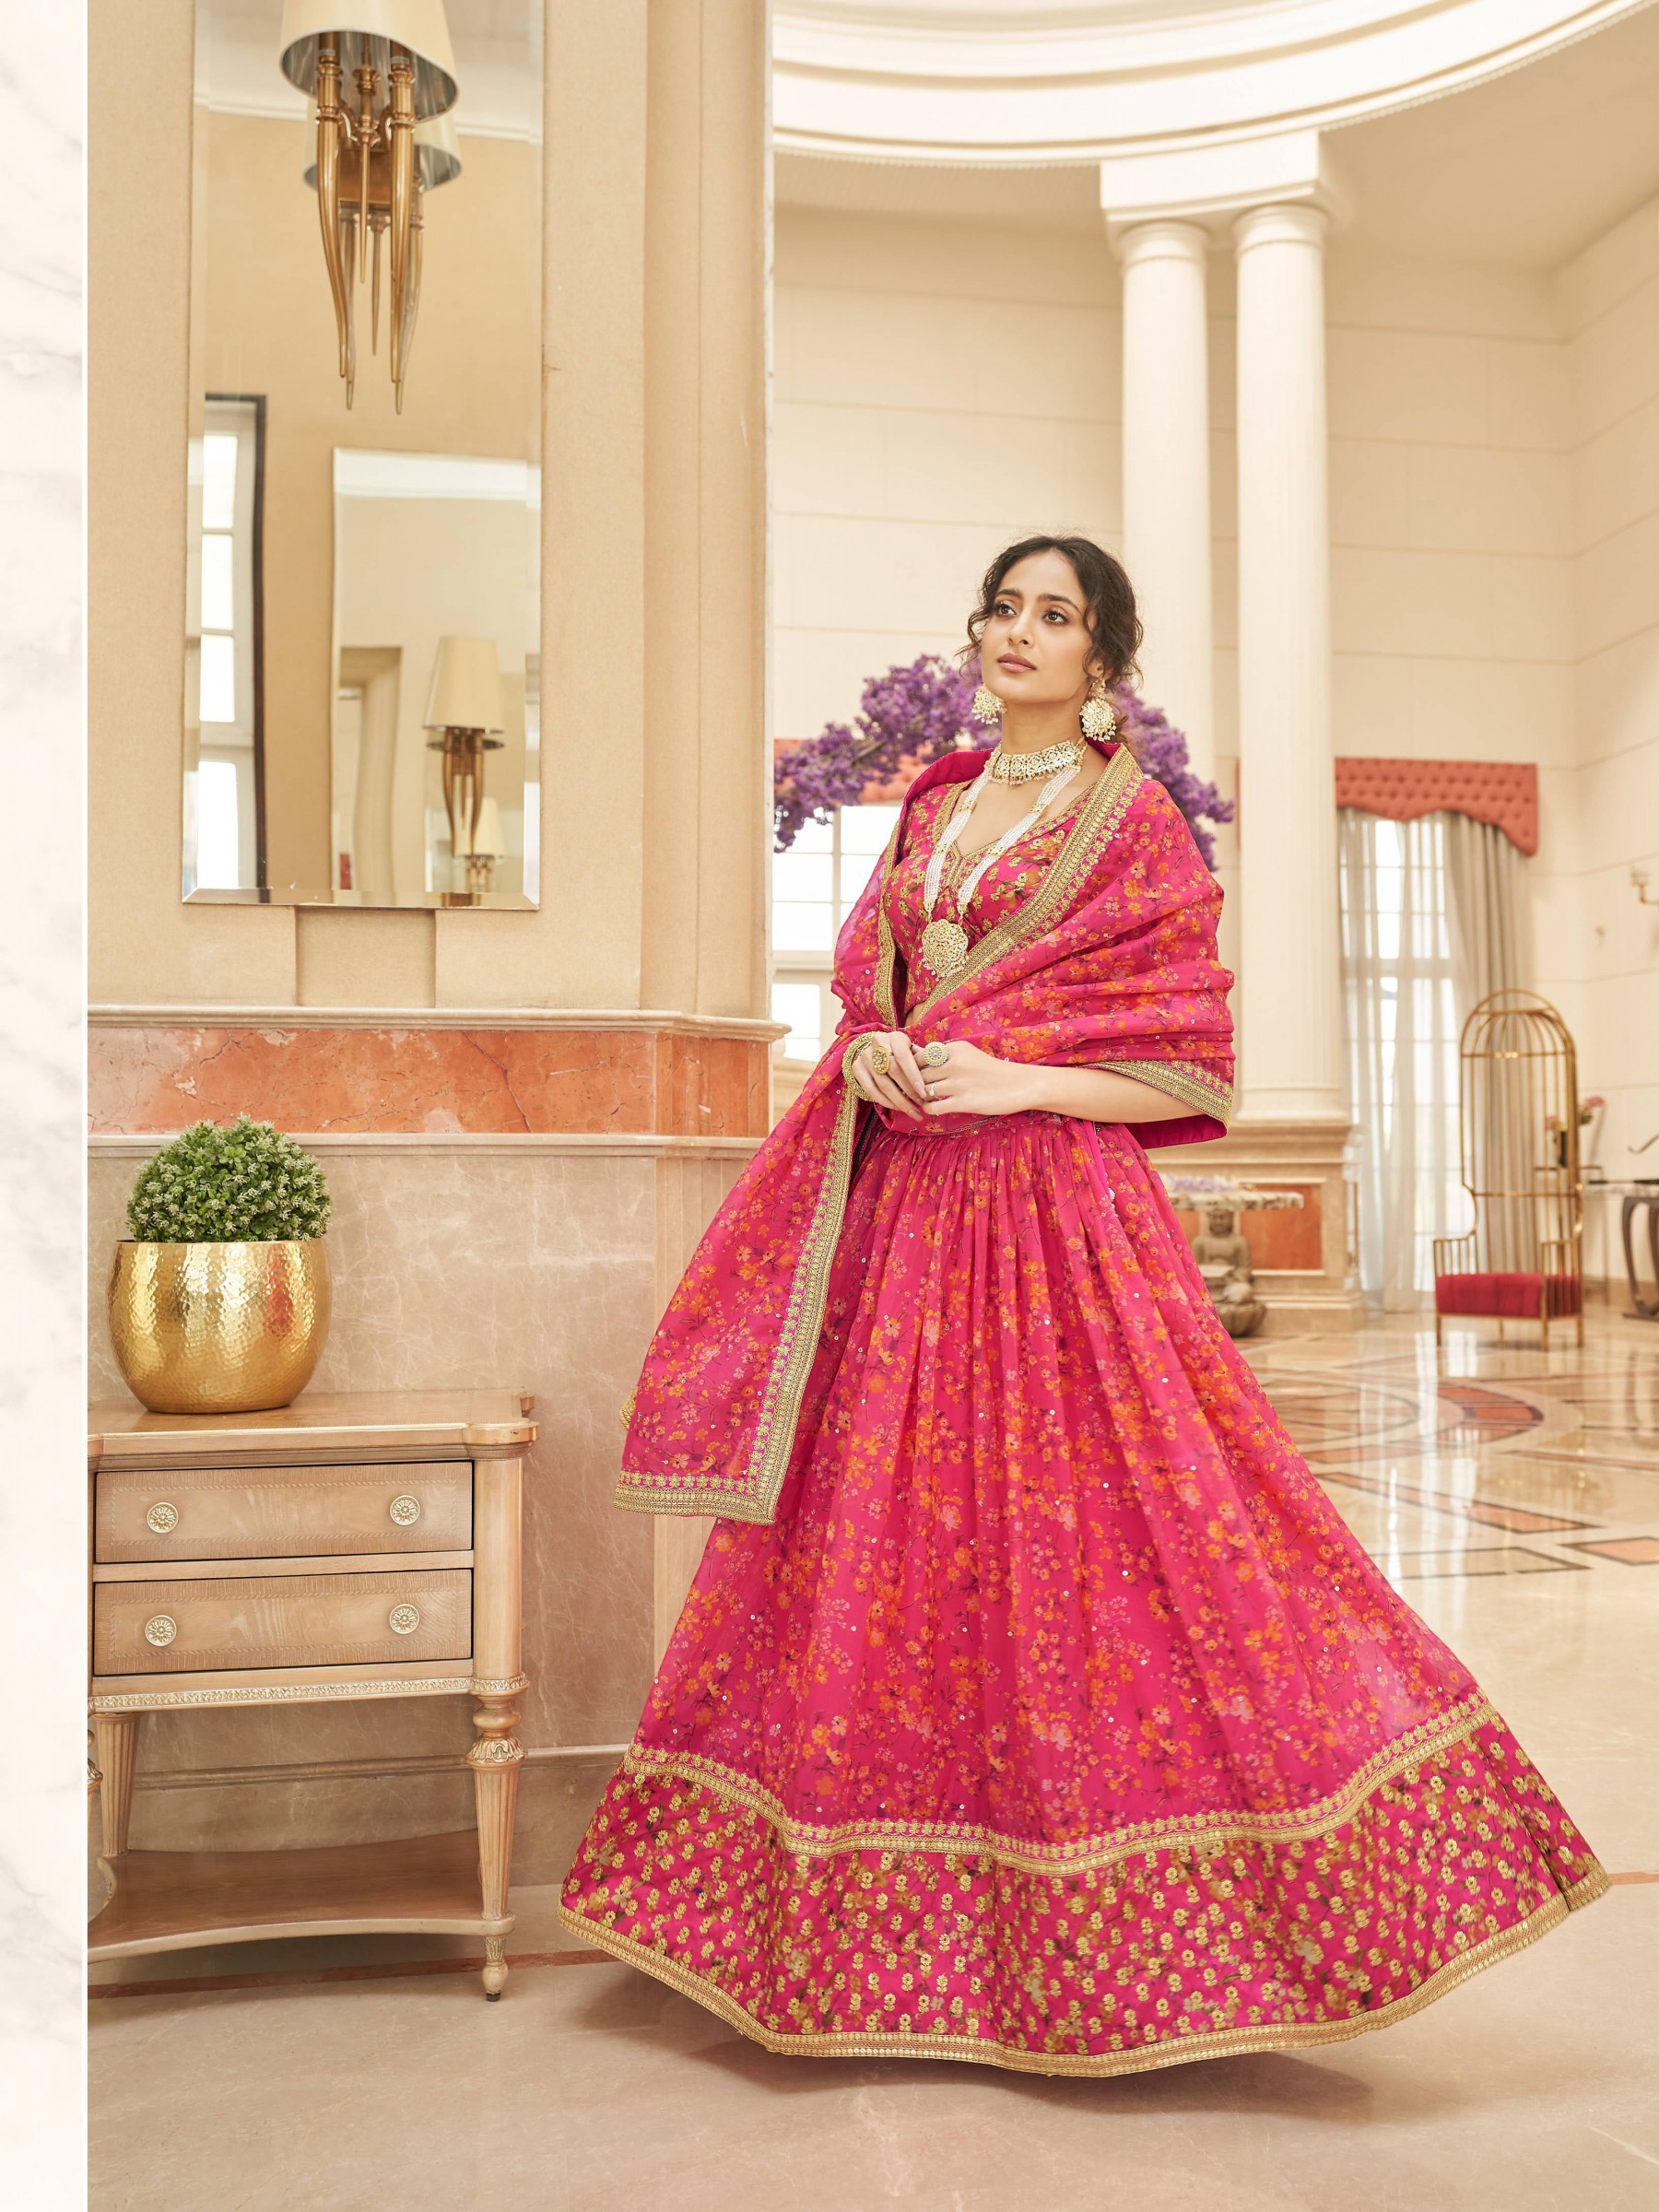 Geogratte Fabrics Party Wear Lehenga in Pink Color With Embroidery Work